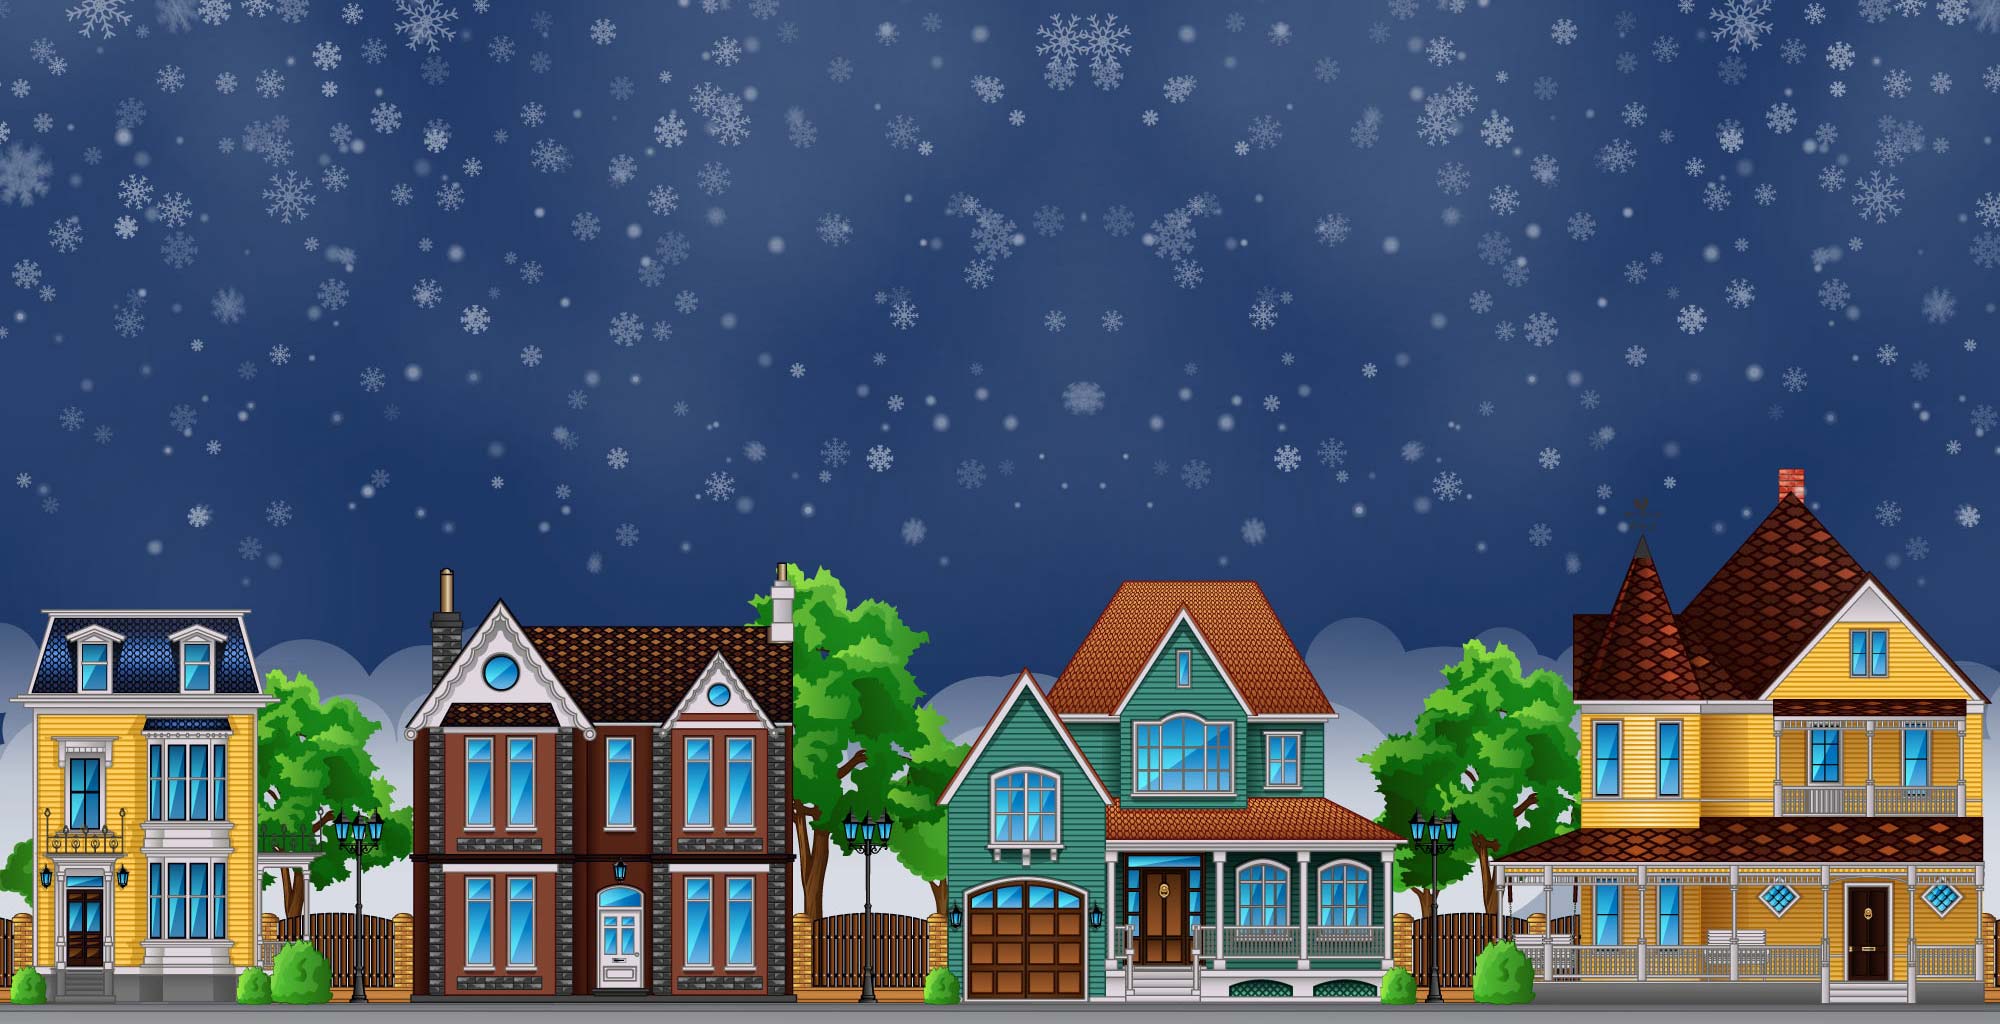 Illustrated historic town homes with snow